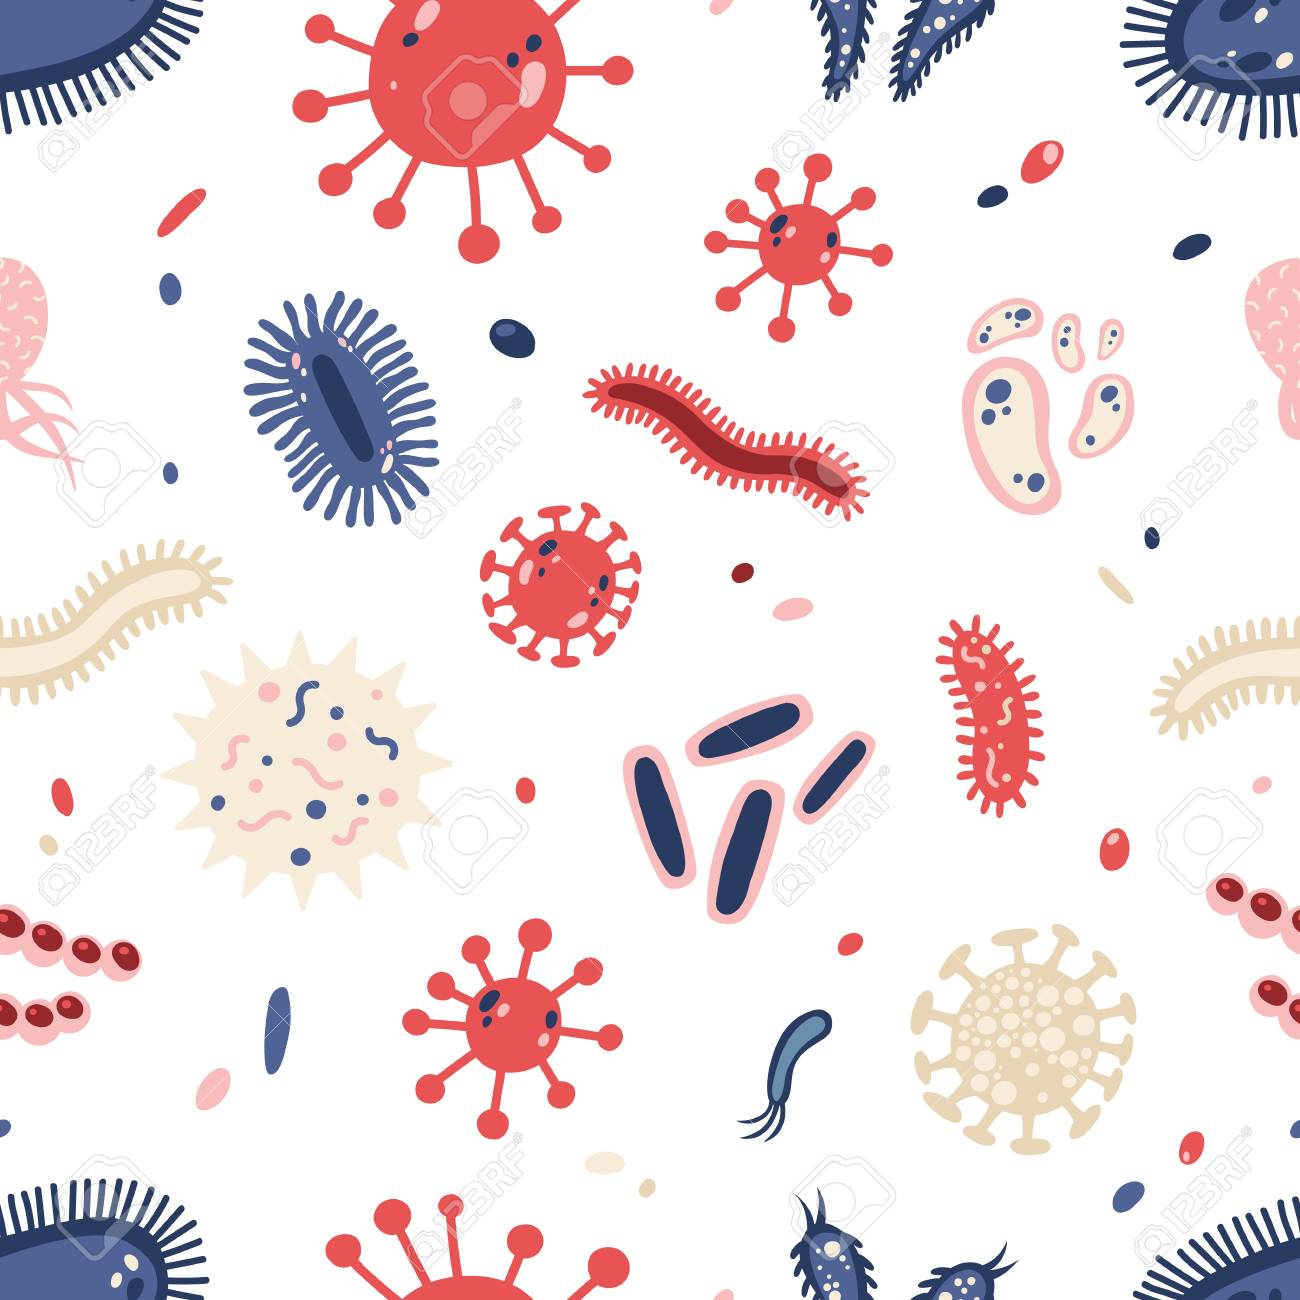 Seamless Pattern With Various Microorganisms On White Background